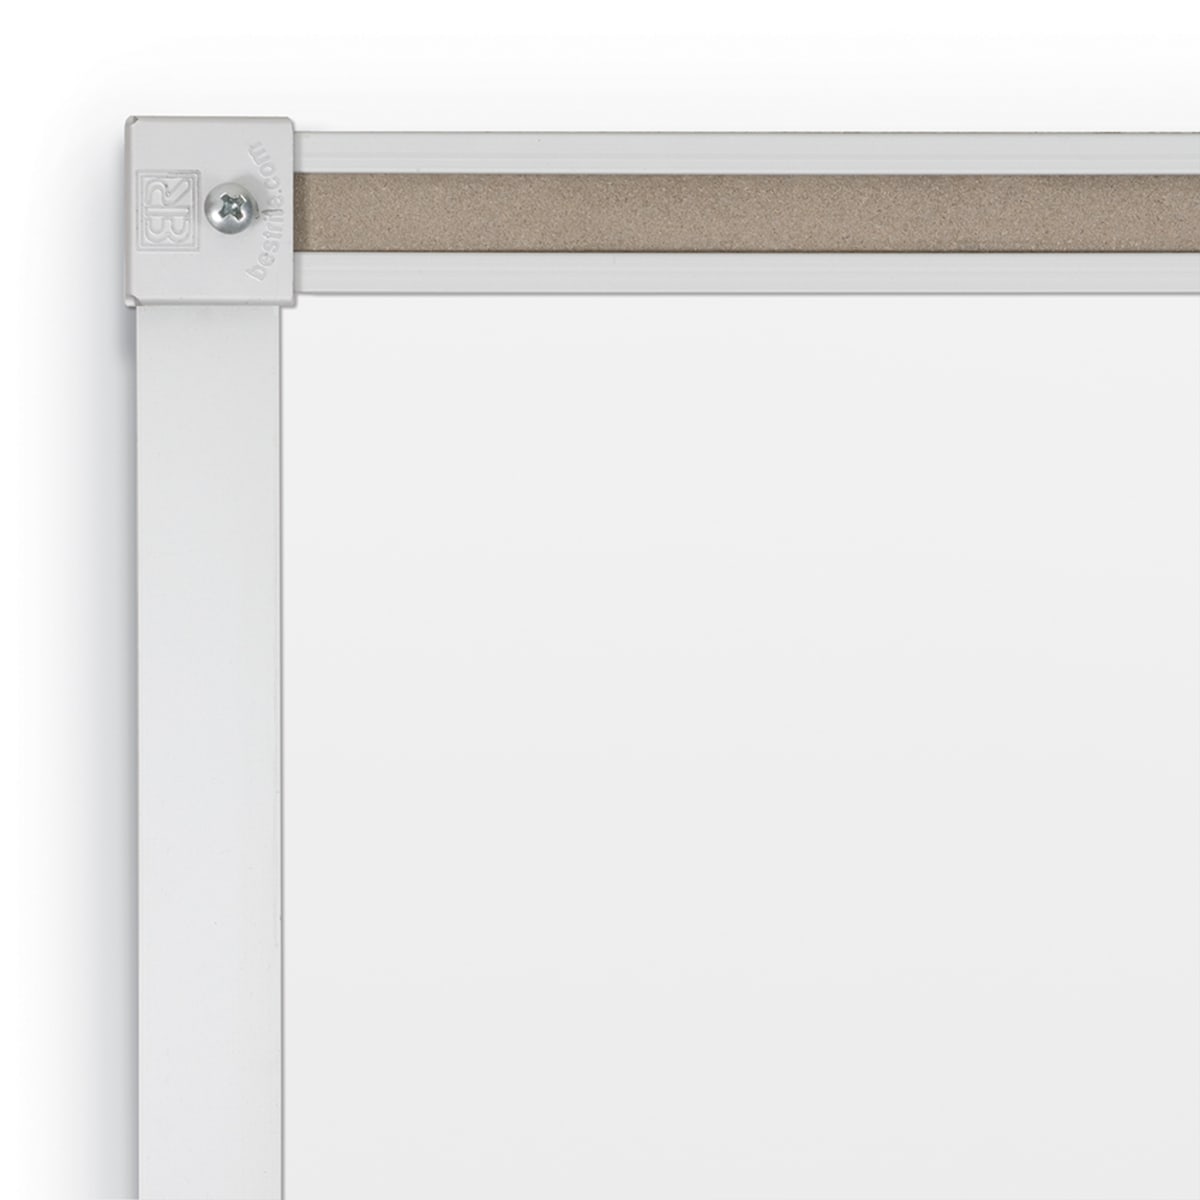 Mooreco Magne-Rite Whiteboard - Deluxe Aluminum Trim - 4'H x 6'W (Mooreco 219AG) - SchoolOutlet